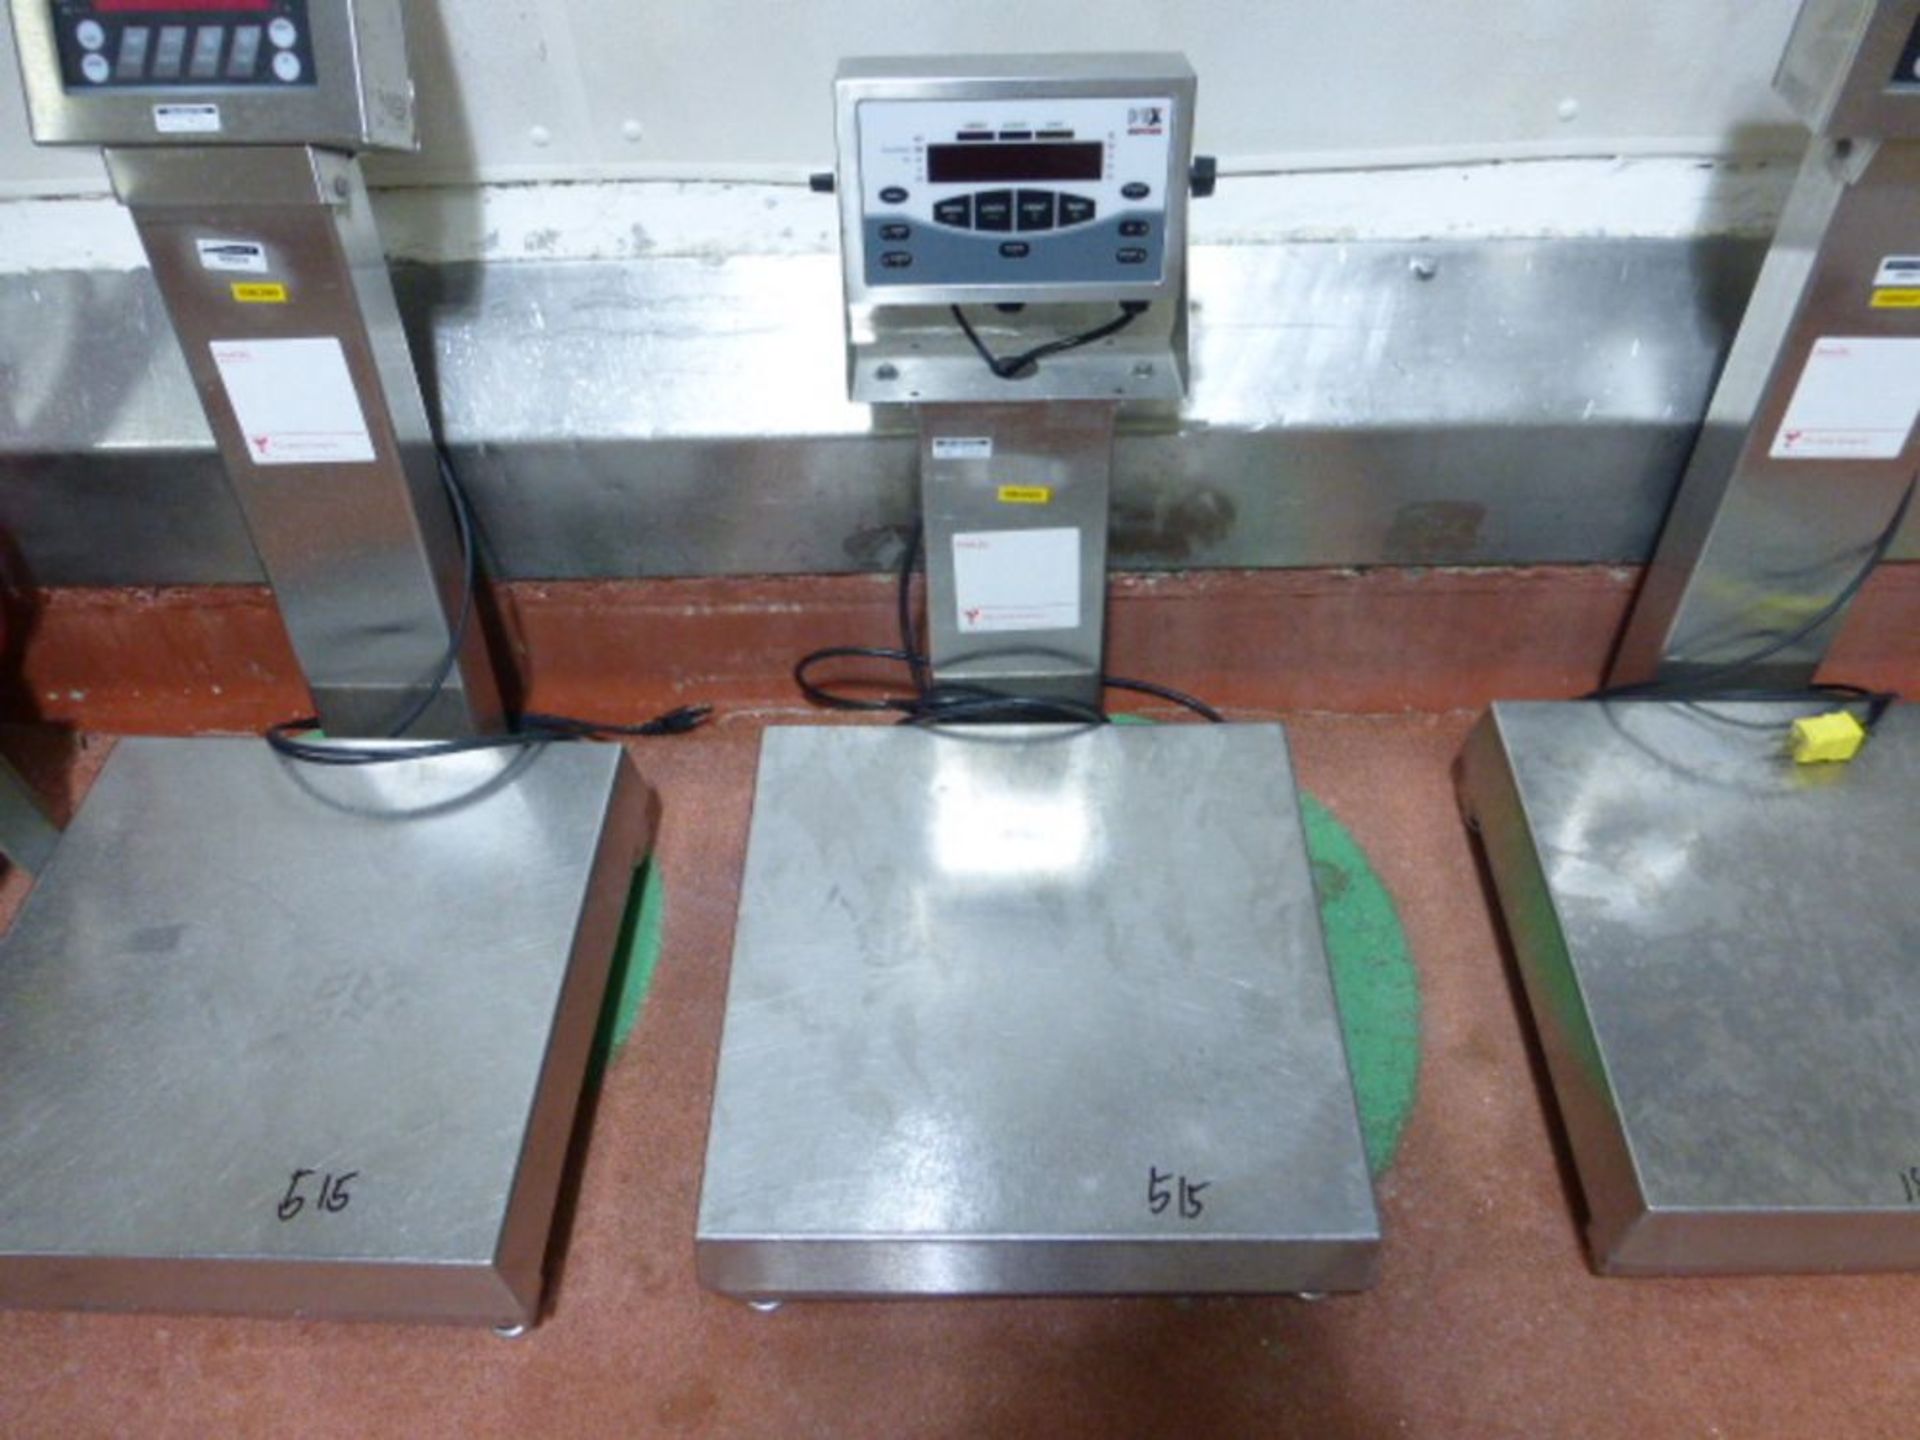 (4) Table scales mod. no. Rice Lakes with (3) 18 in x 18 in and (1) 22 in x 28 in stainless platform